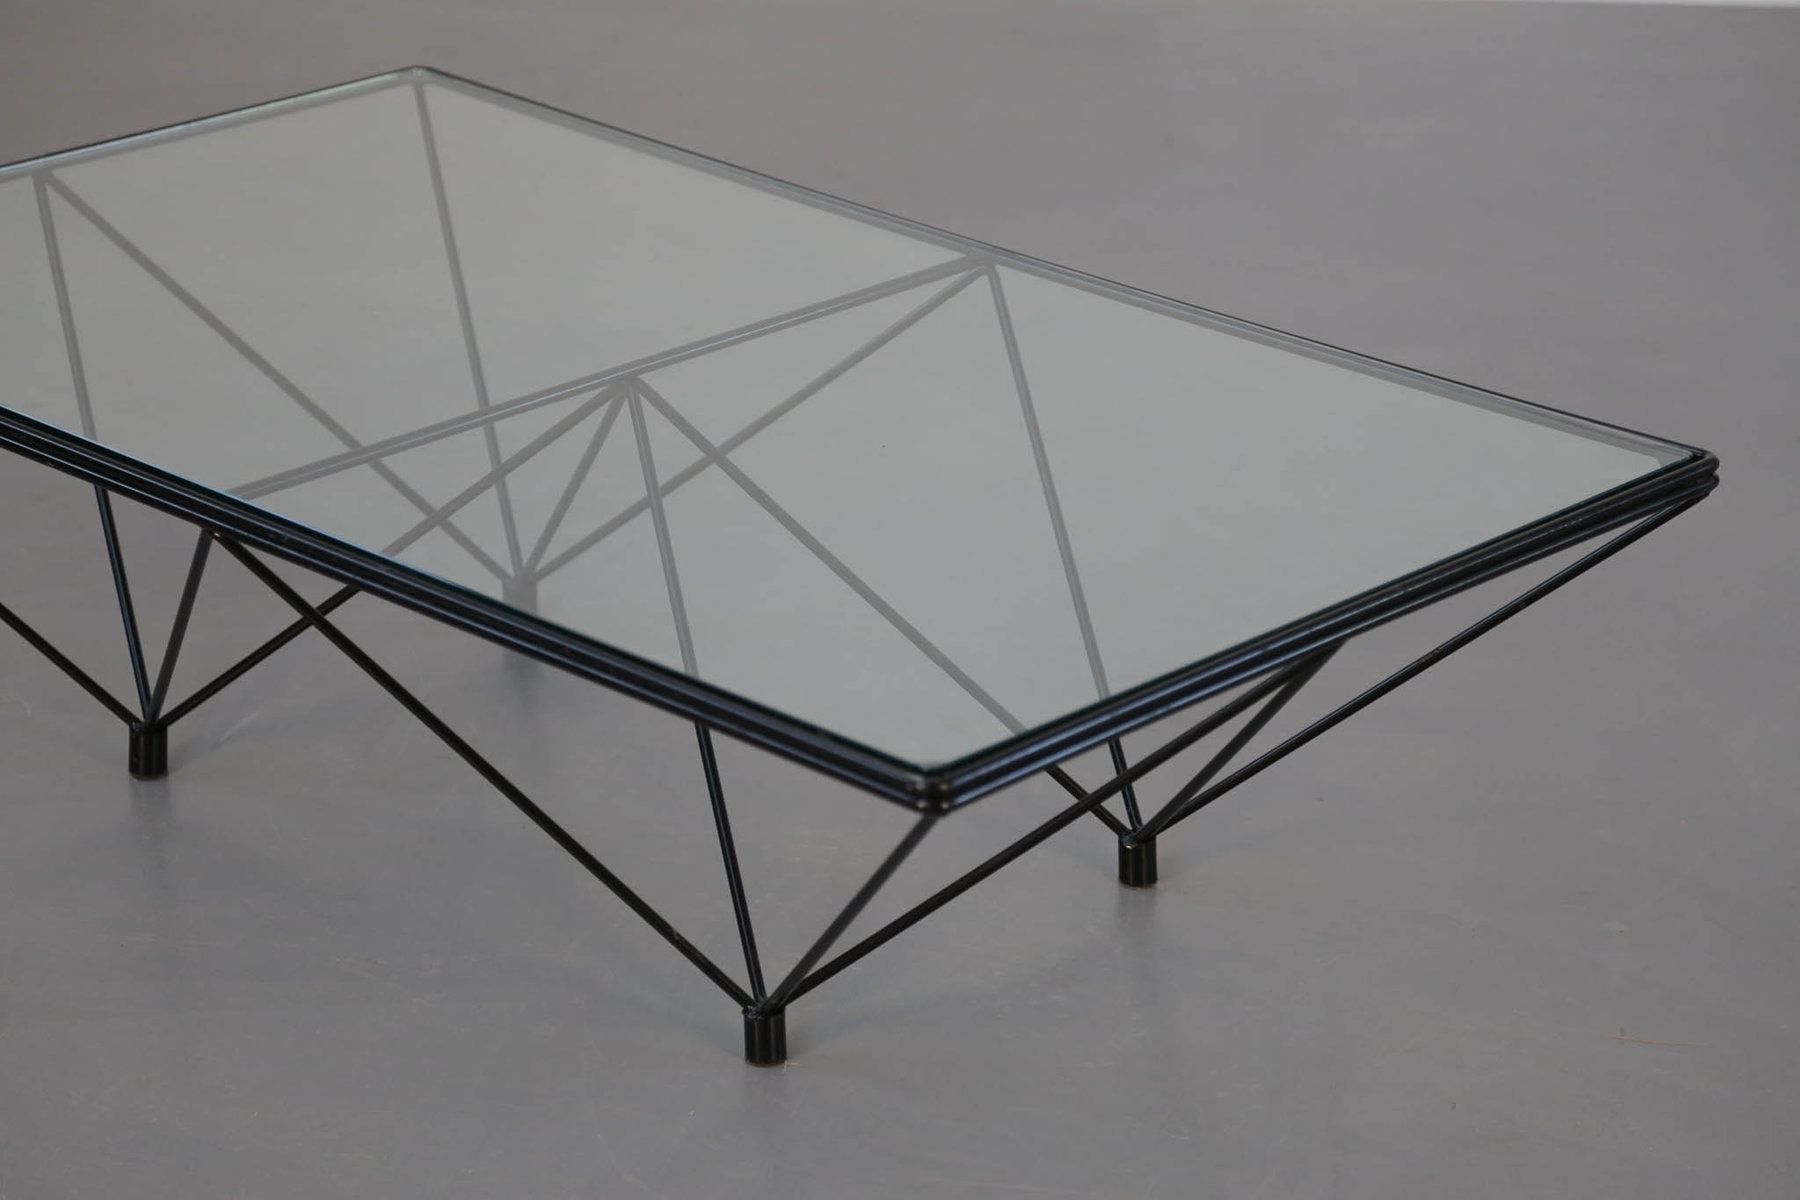 Vintage Geometric Glass Top Coffee Table For Sale At Pamono Pertaining To Popular Geometric Coffee Tables (View 9 of 20)